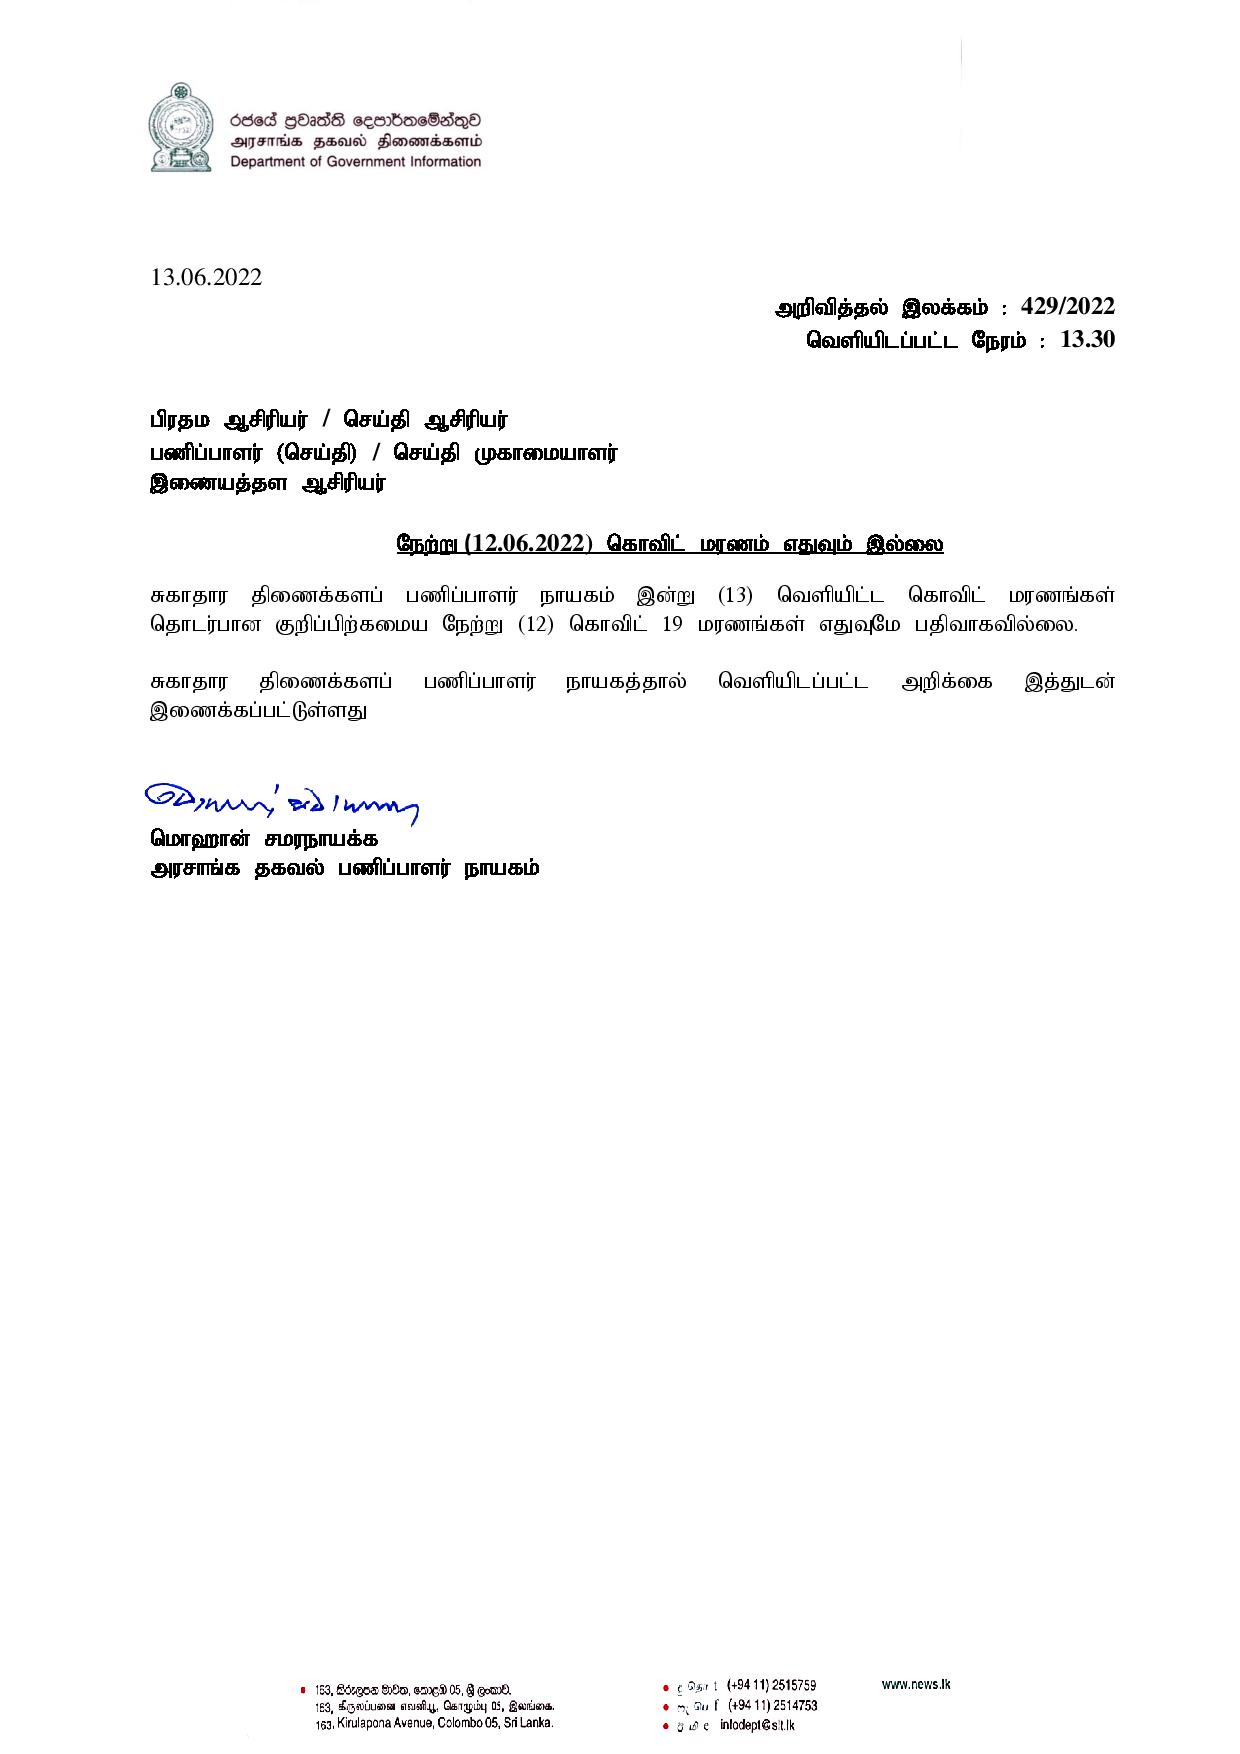 Press Release 429 Tamil page 001